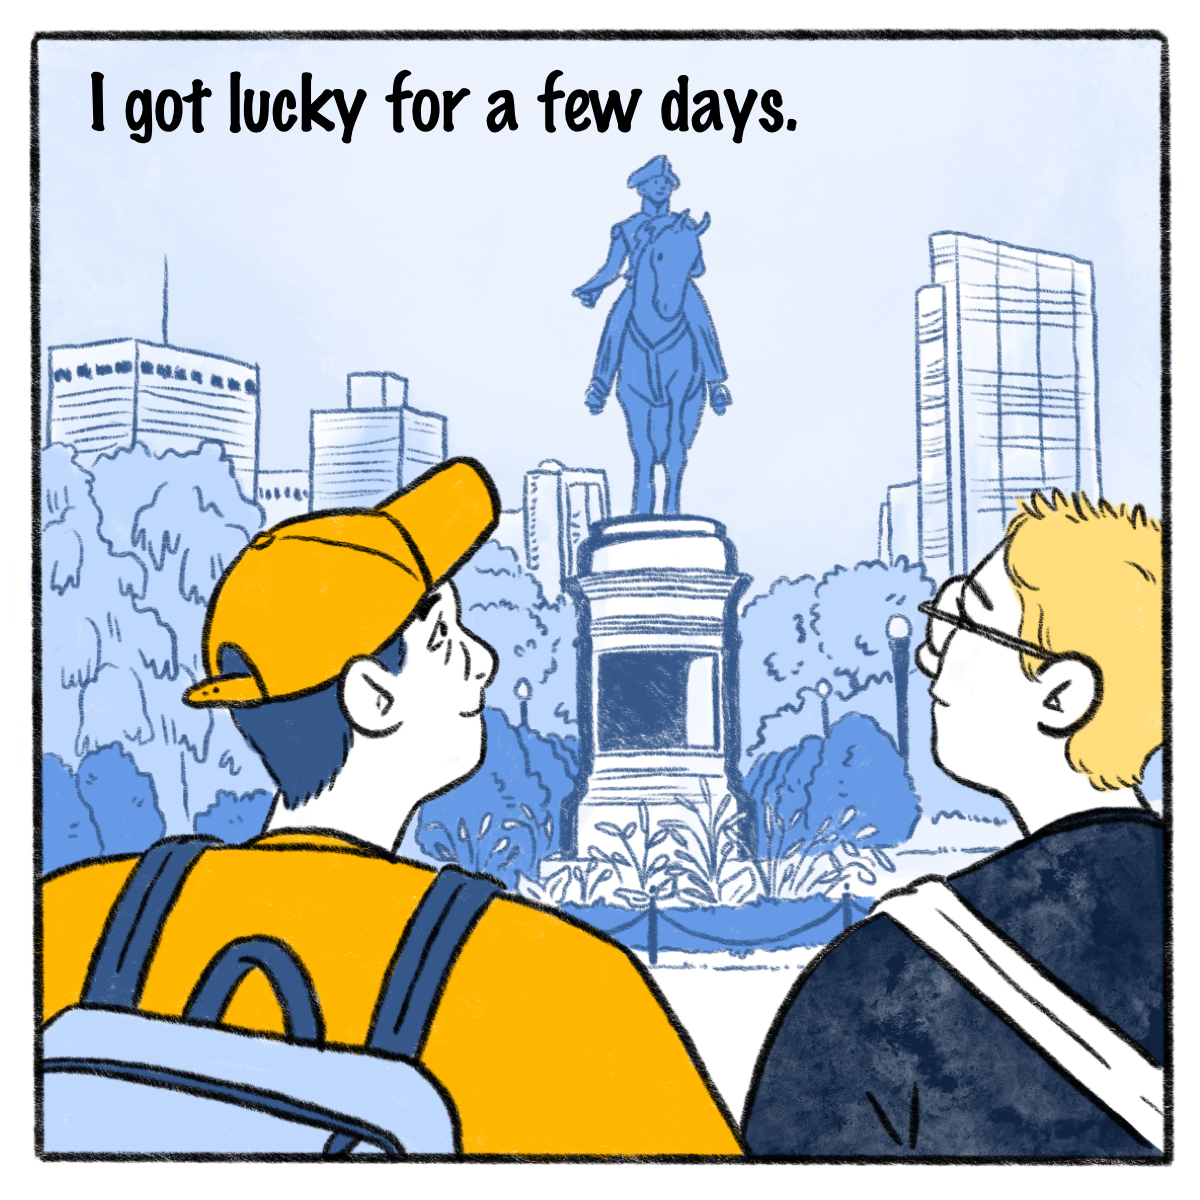 Two people are looking at a monument in a city, "I got lucky for a few days." is written at the top 